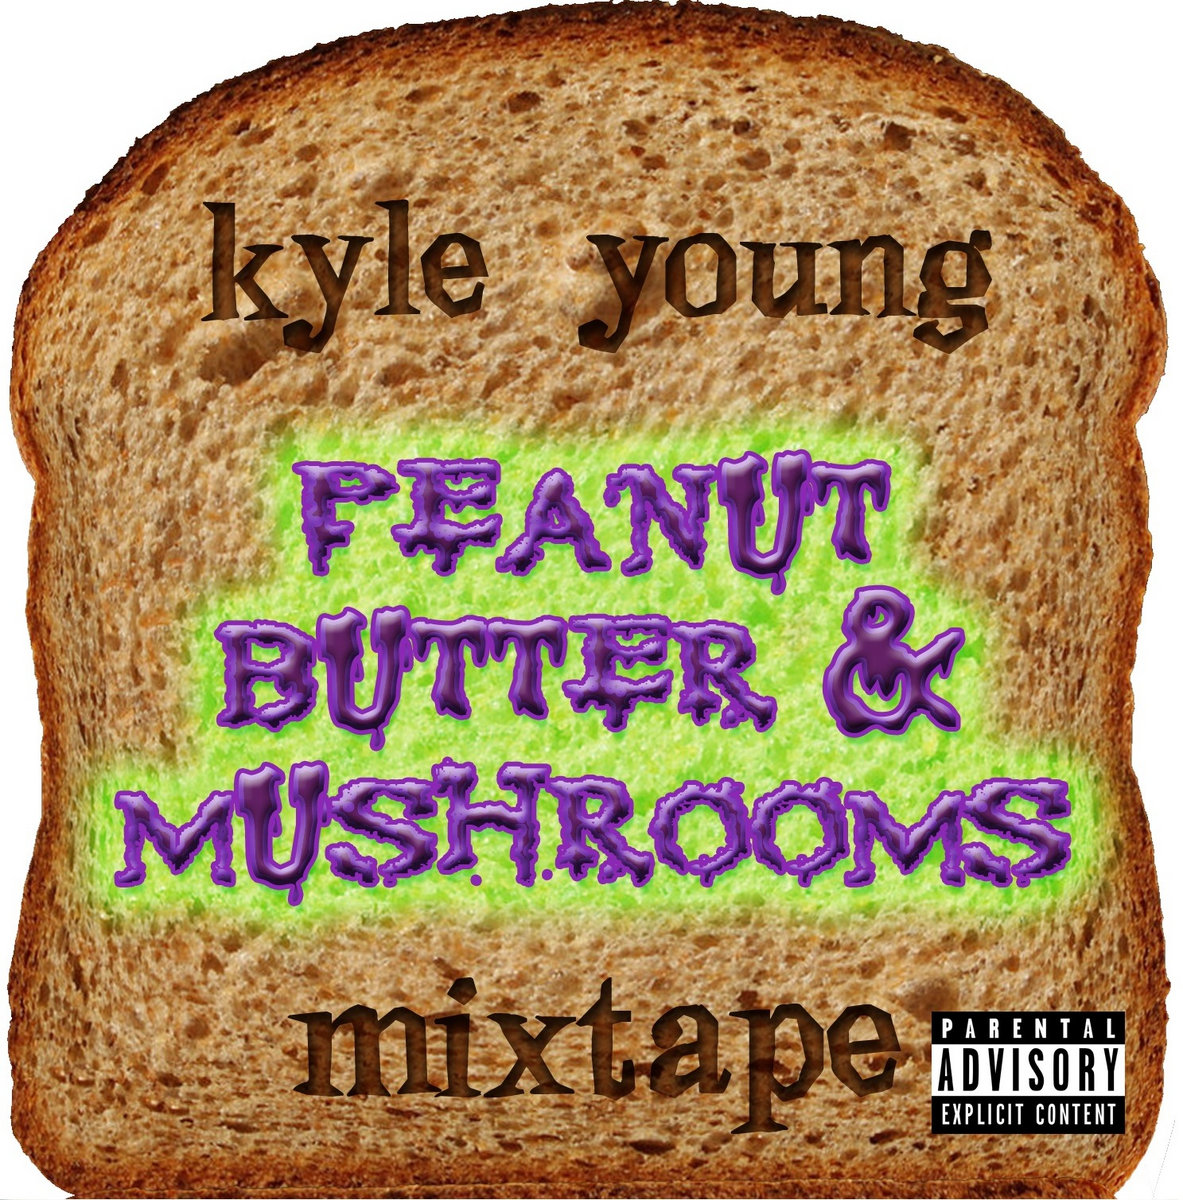 Kyle Young Peanut Butter & Mushrooms